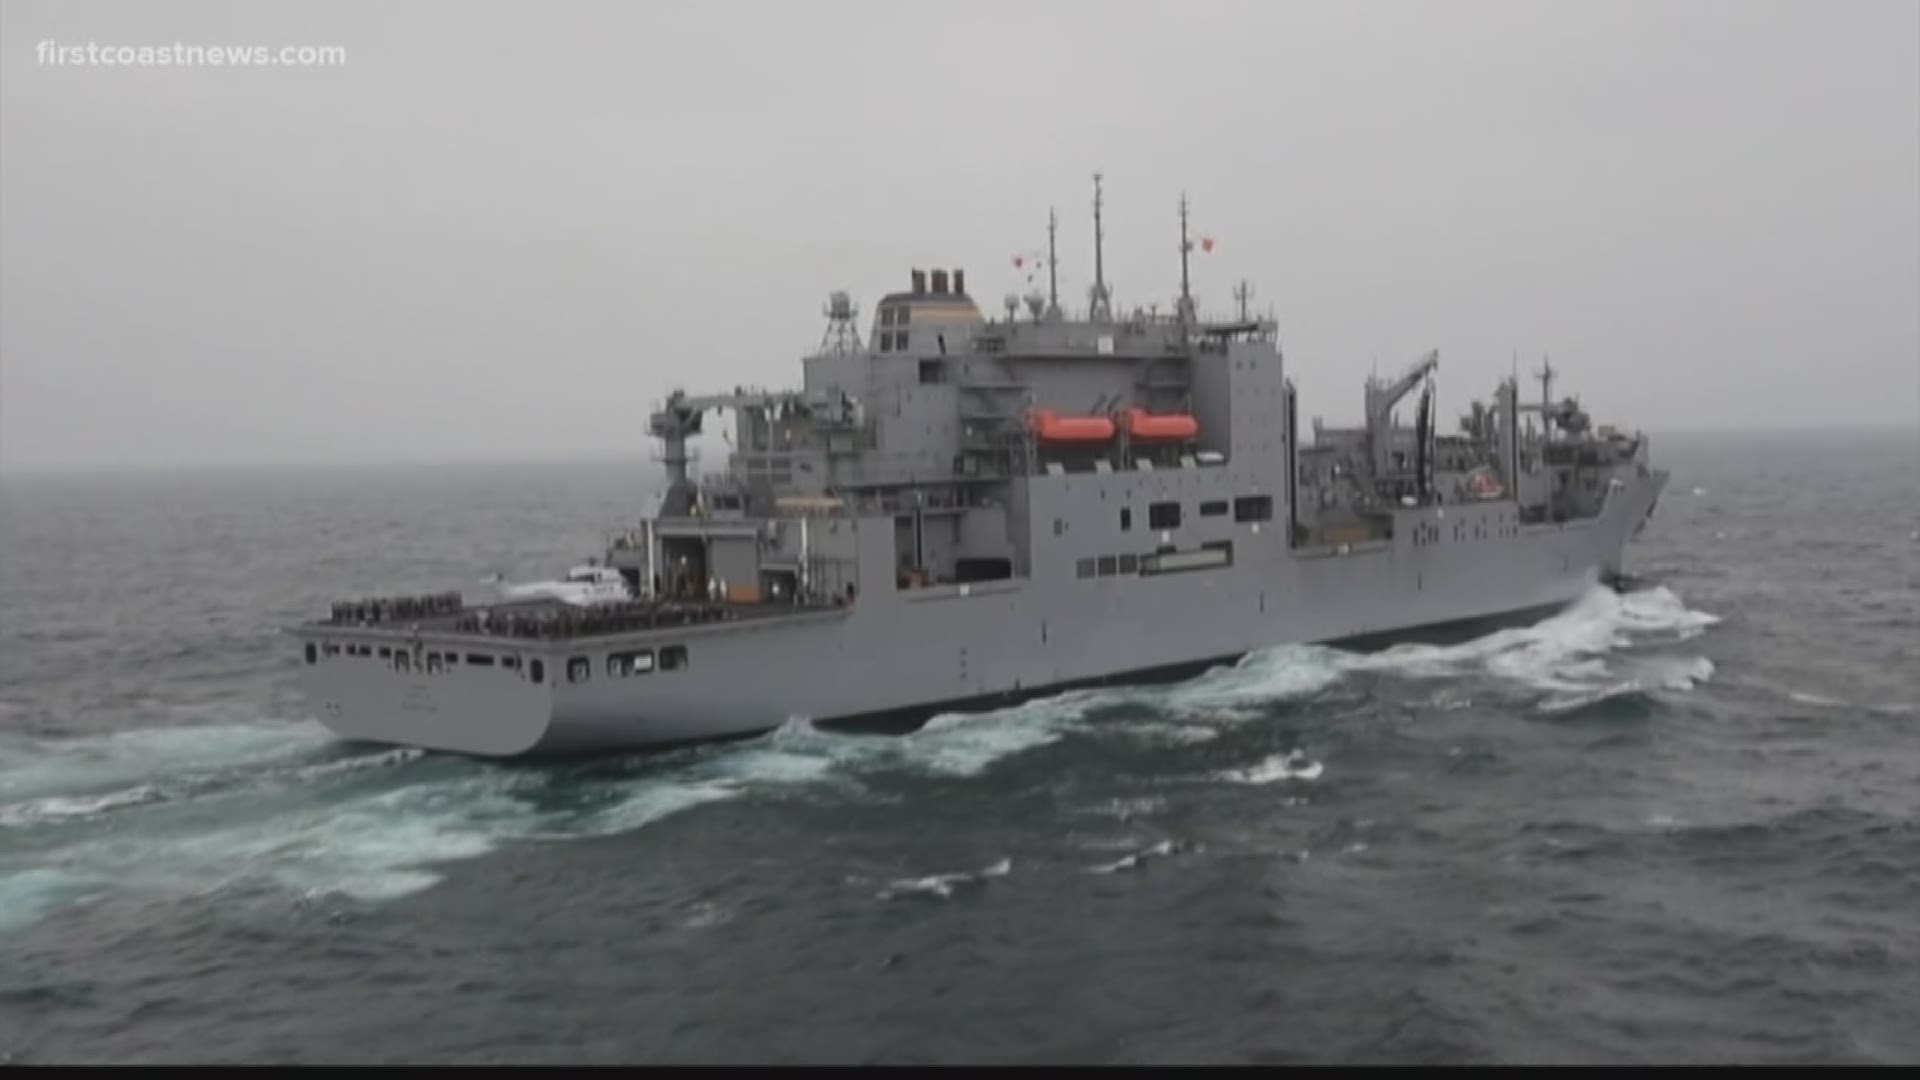 Officials said sailors and Marines onboard became ill with parotitis while the ship, which is based in Mayport, was overseas in the Middle East on Dec. 22.